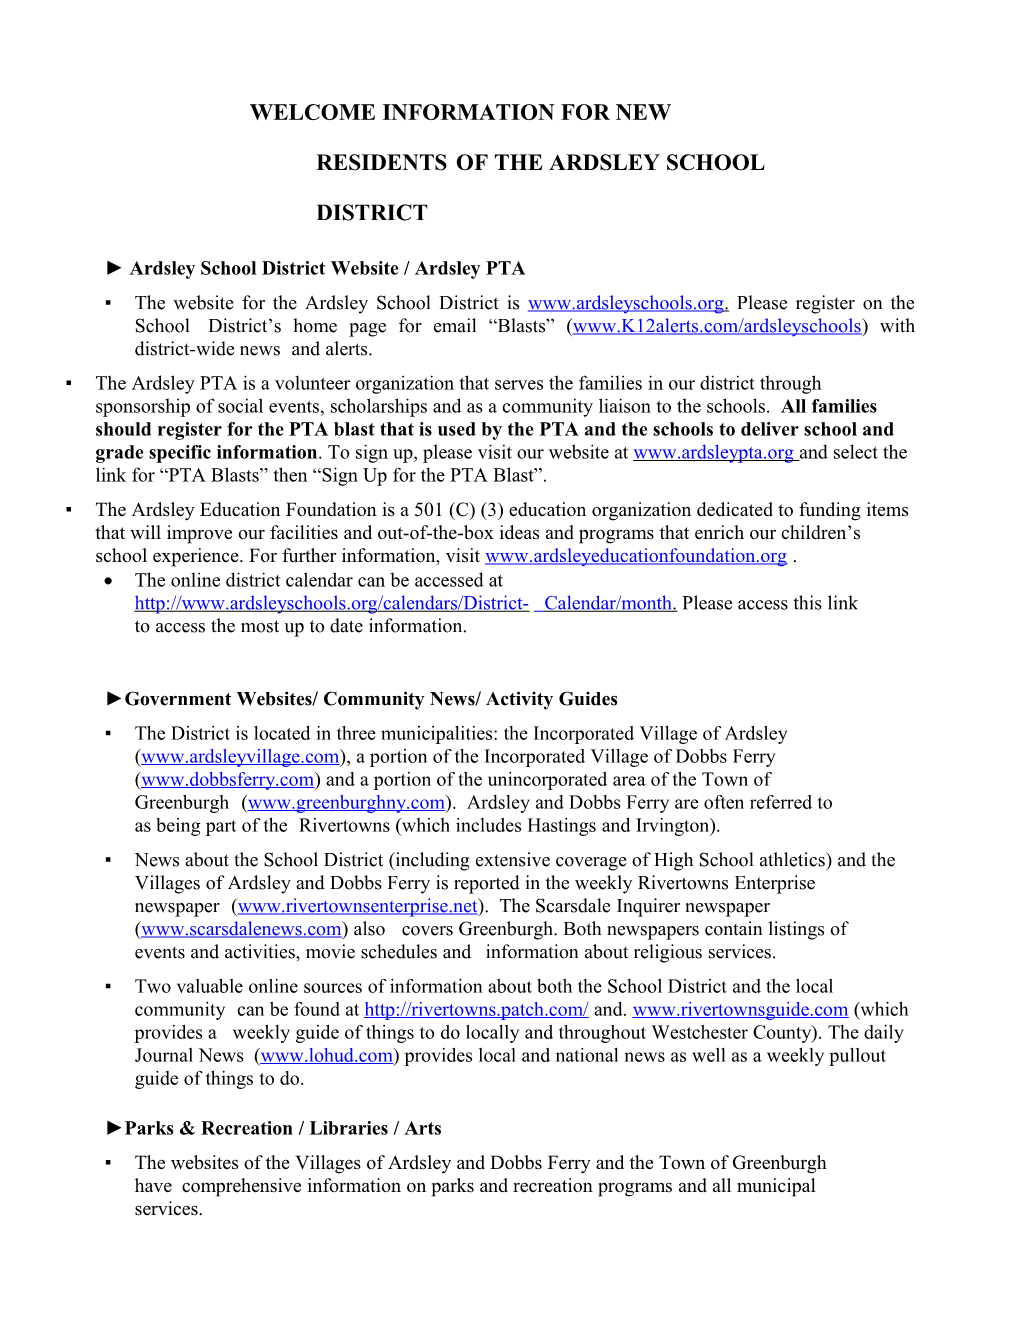 Welcome Information for New Members of the Ardsley School District Community